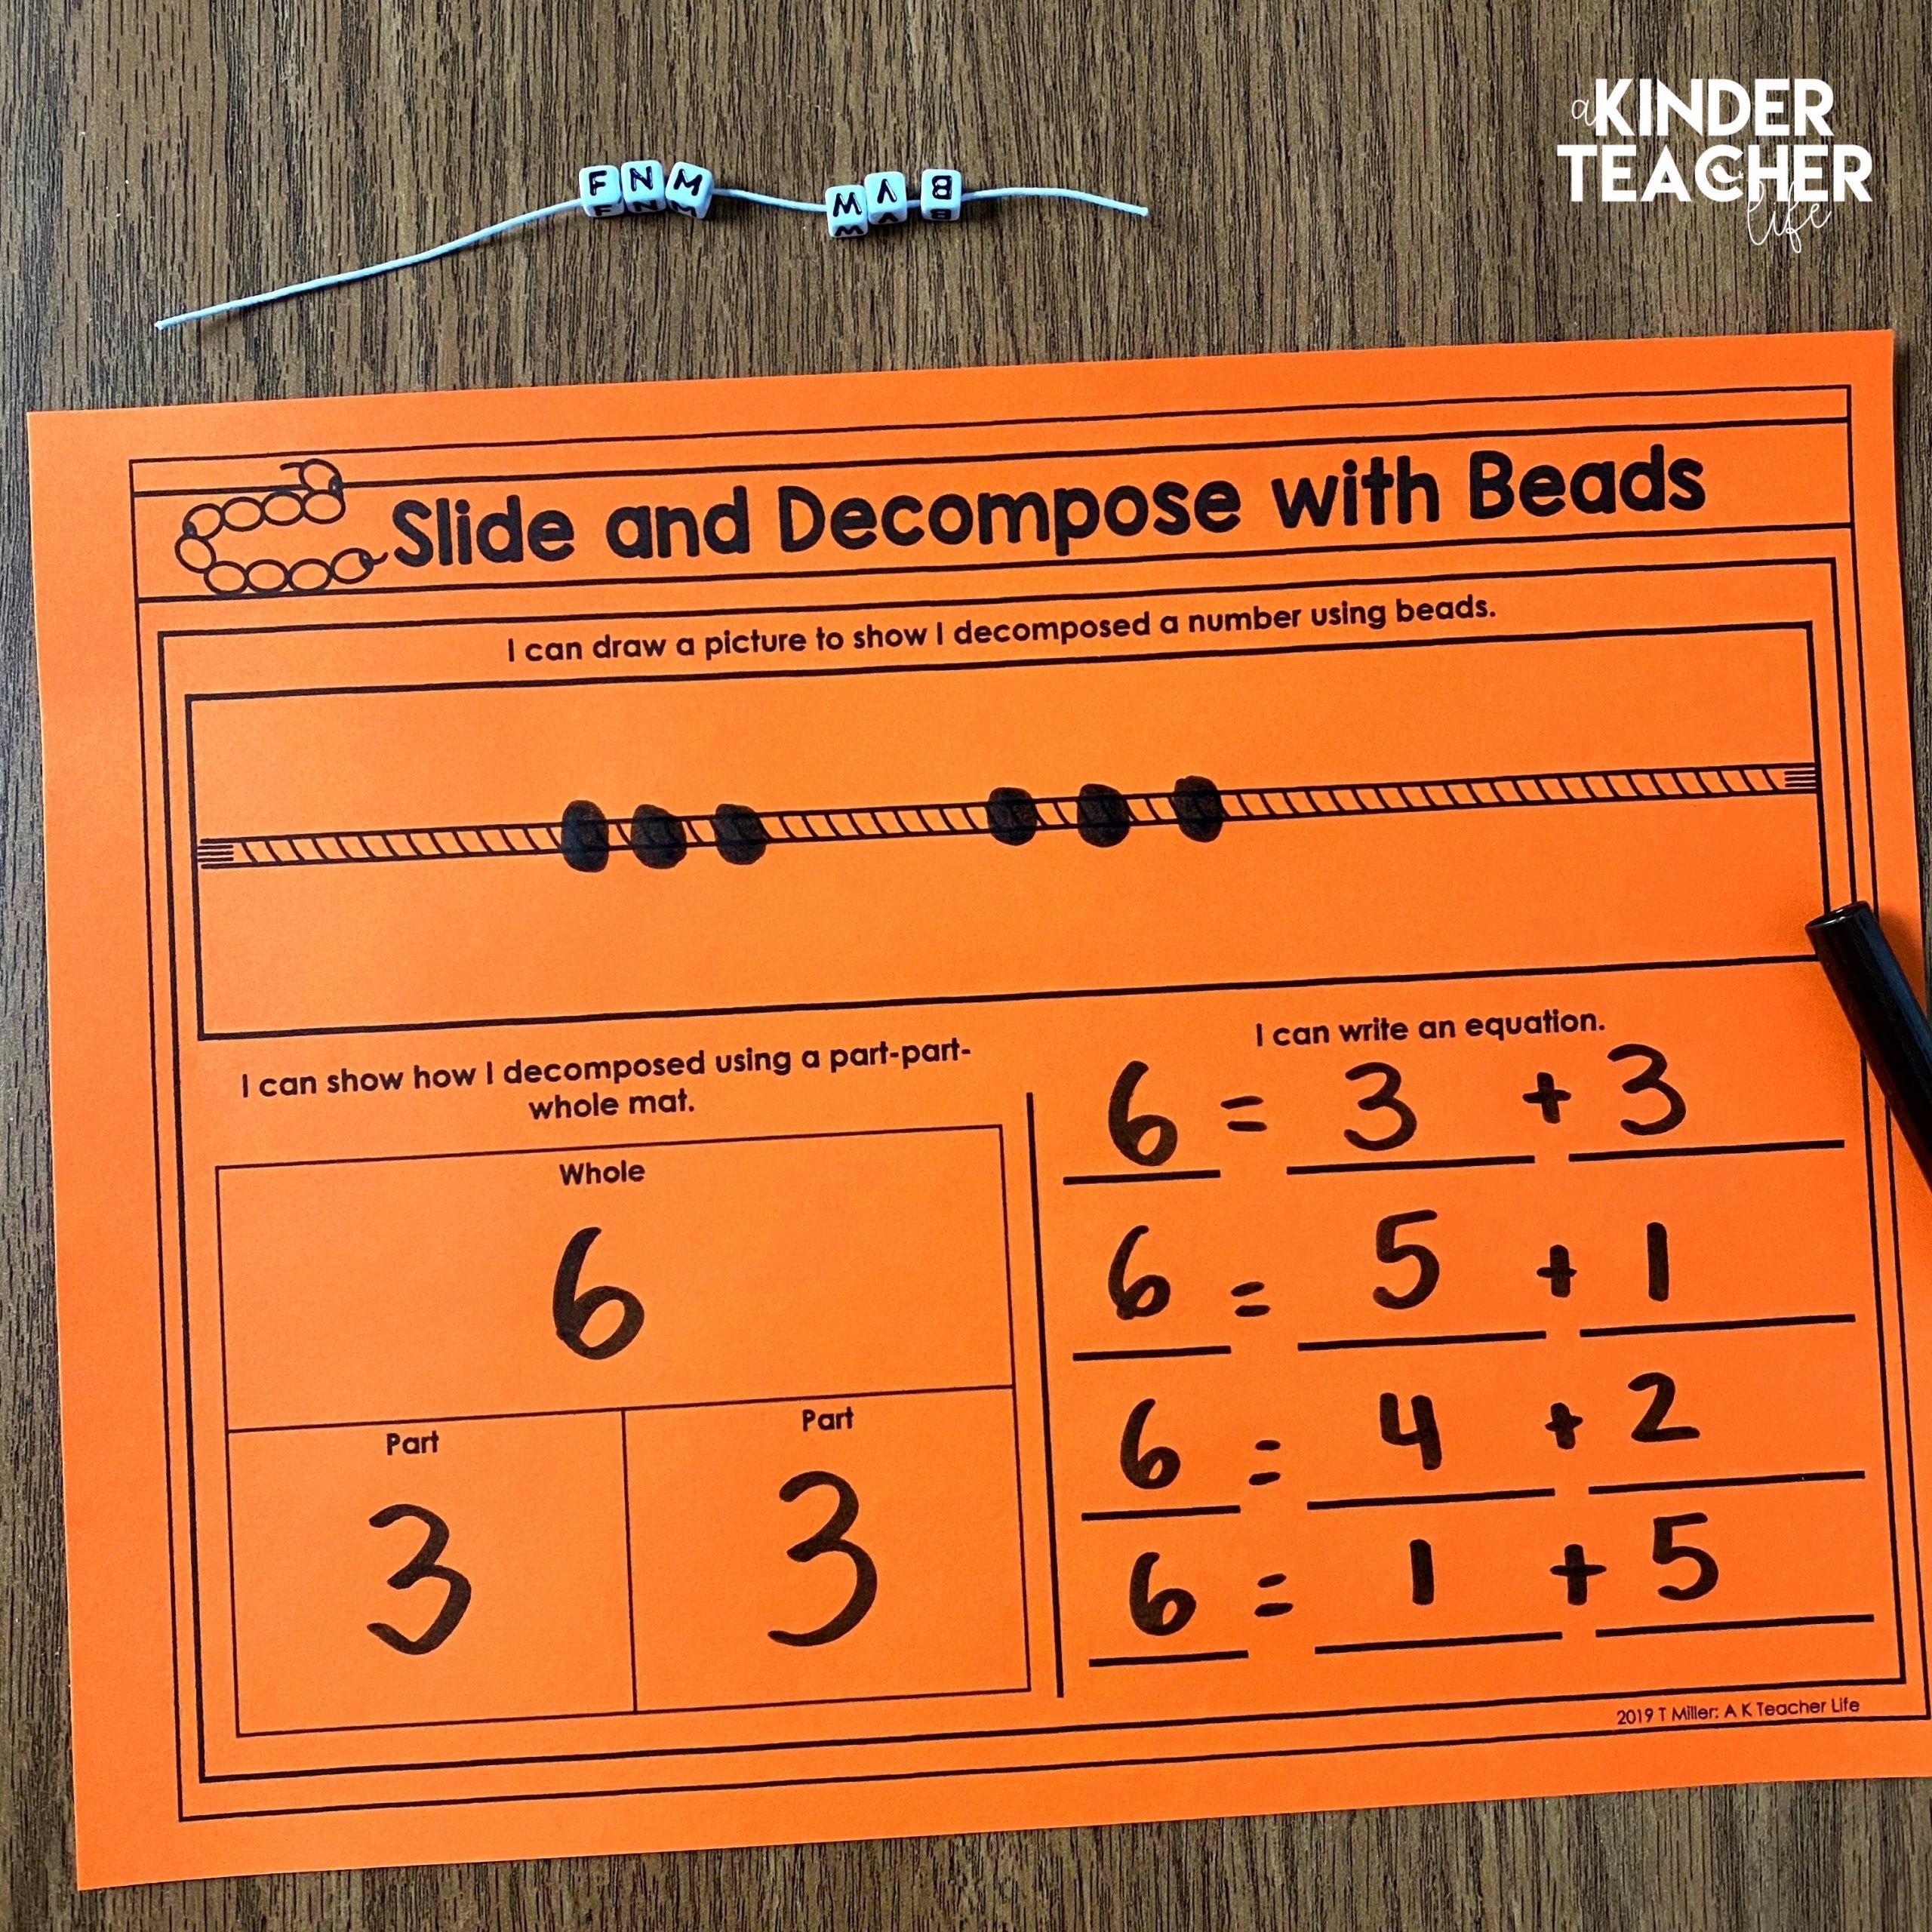 Slide and Decompose with Beads - Read this article to learn how to teach decomposing using hands-on activities. 